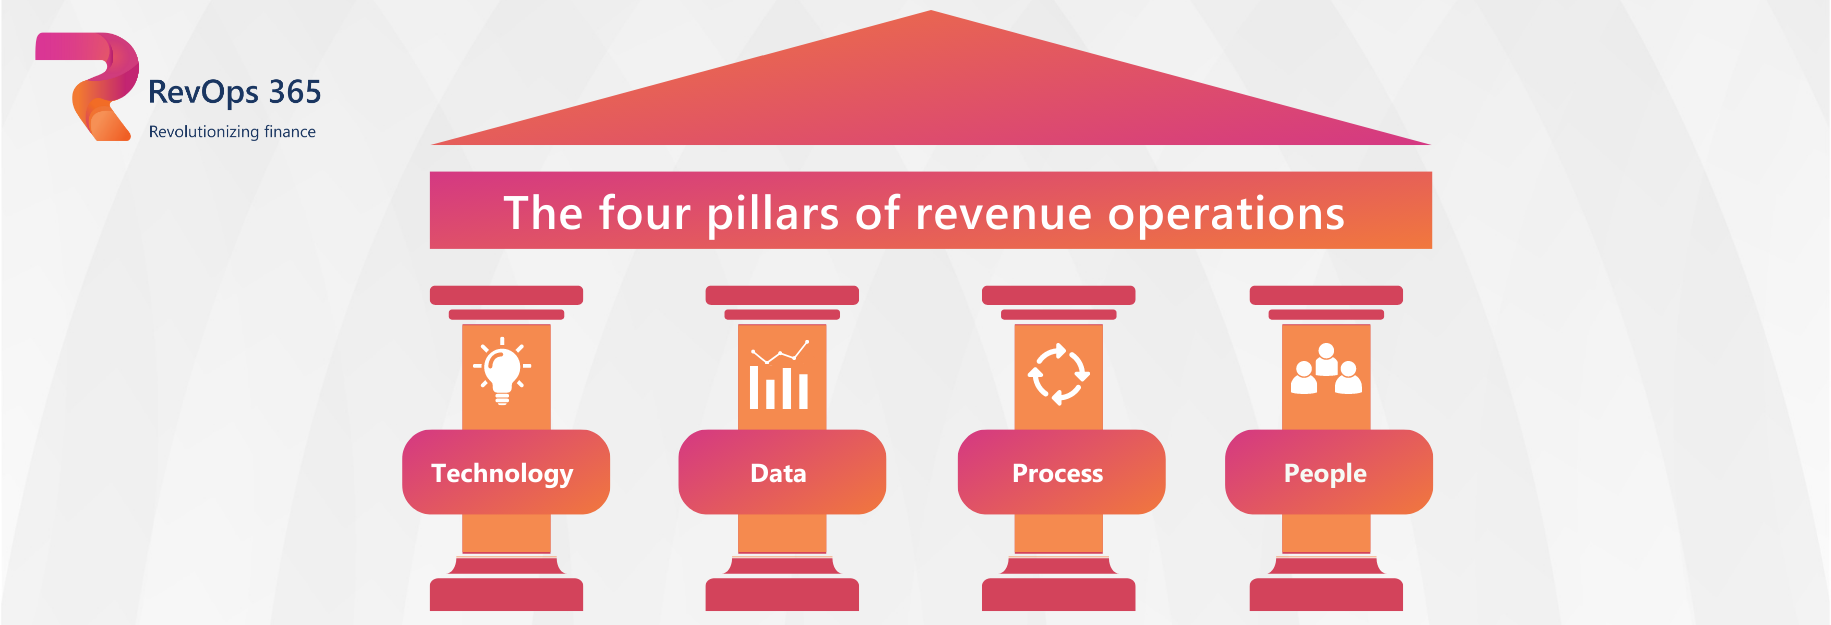 The four pillars of revenue operations